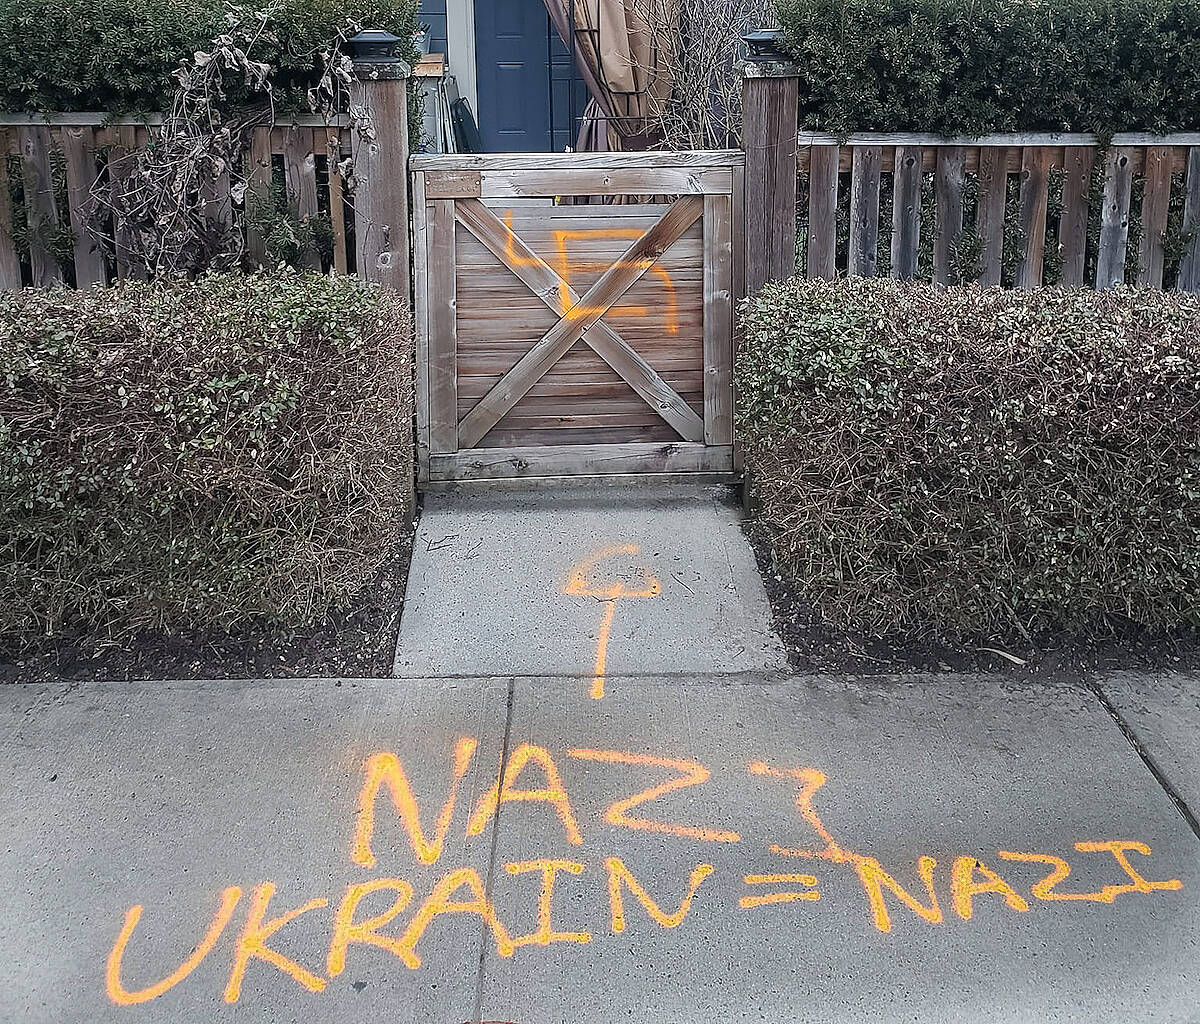 Someone spray painted a swastika and anti-Ukraine graffiti (left) at a Langley townhouse on Thursday, March 9. Police are investigating. (Courtesy Kiersten Bisgaard)